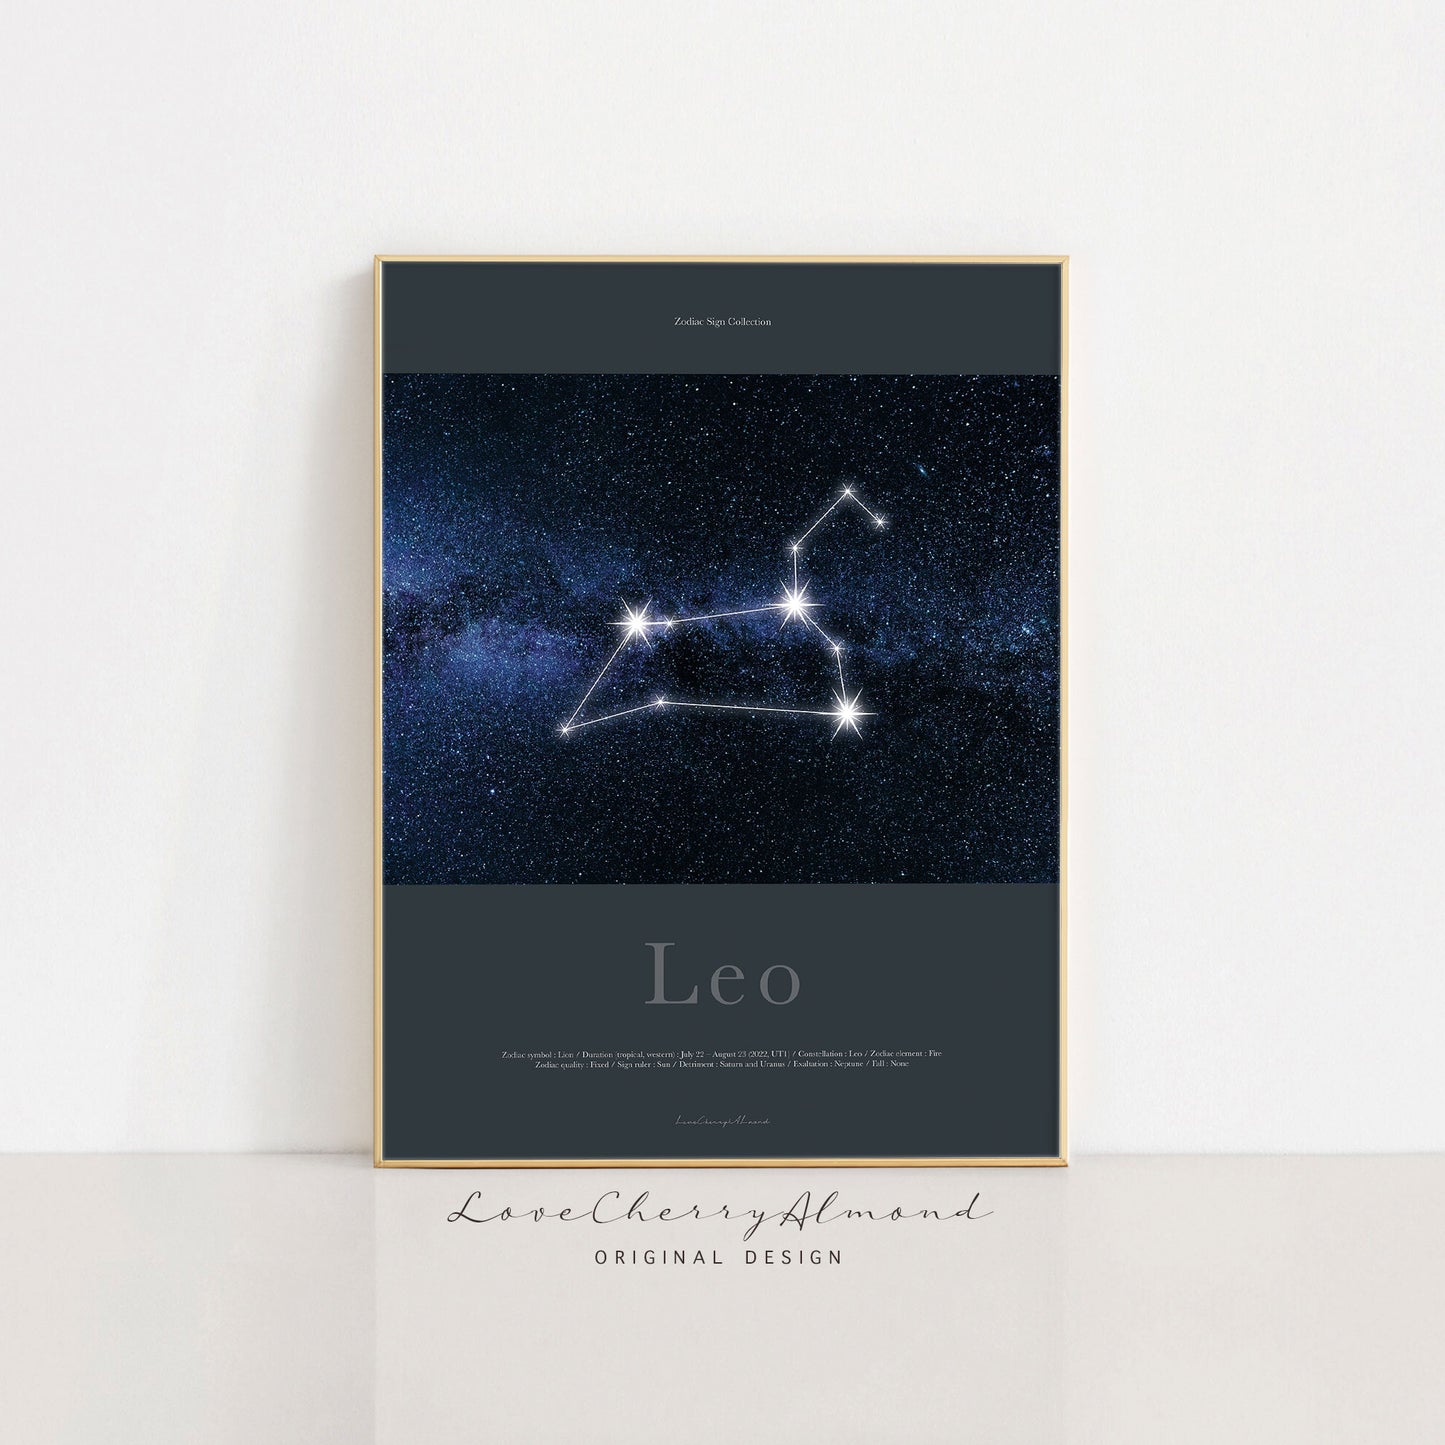 Zodiac Sign Collection "Leo"